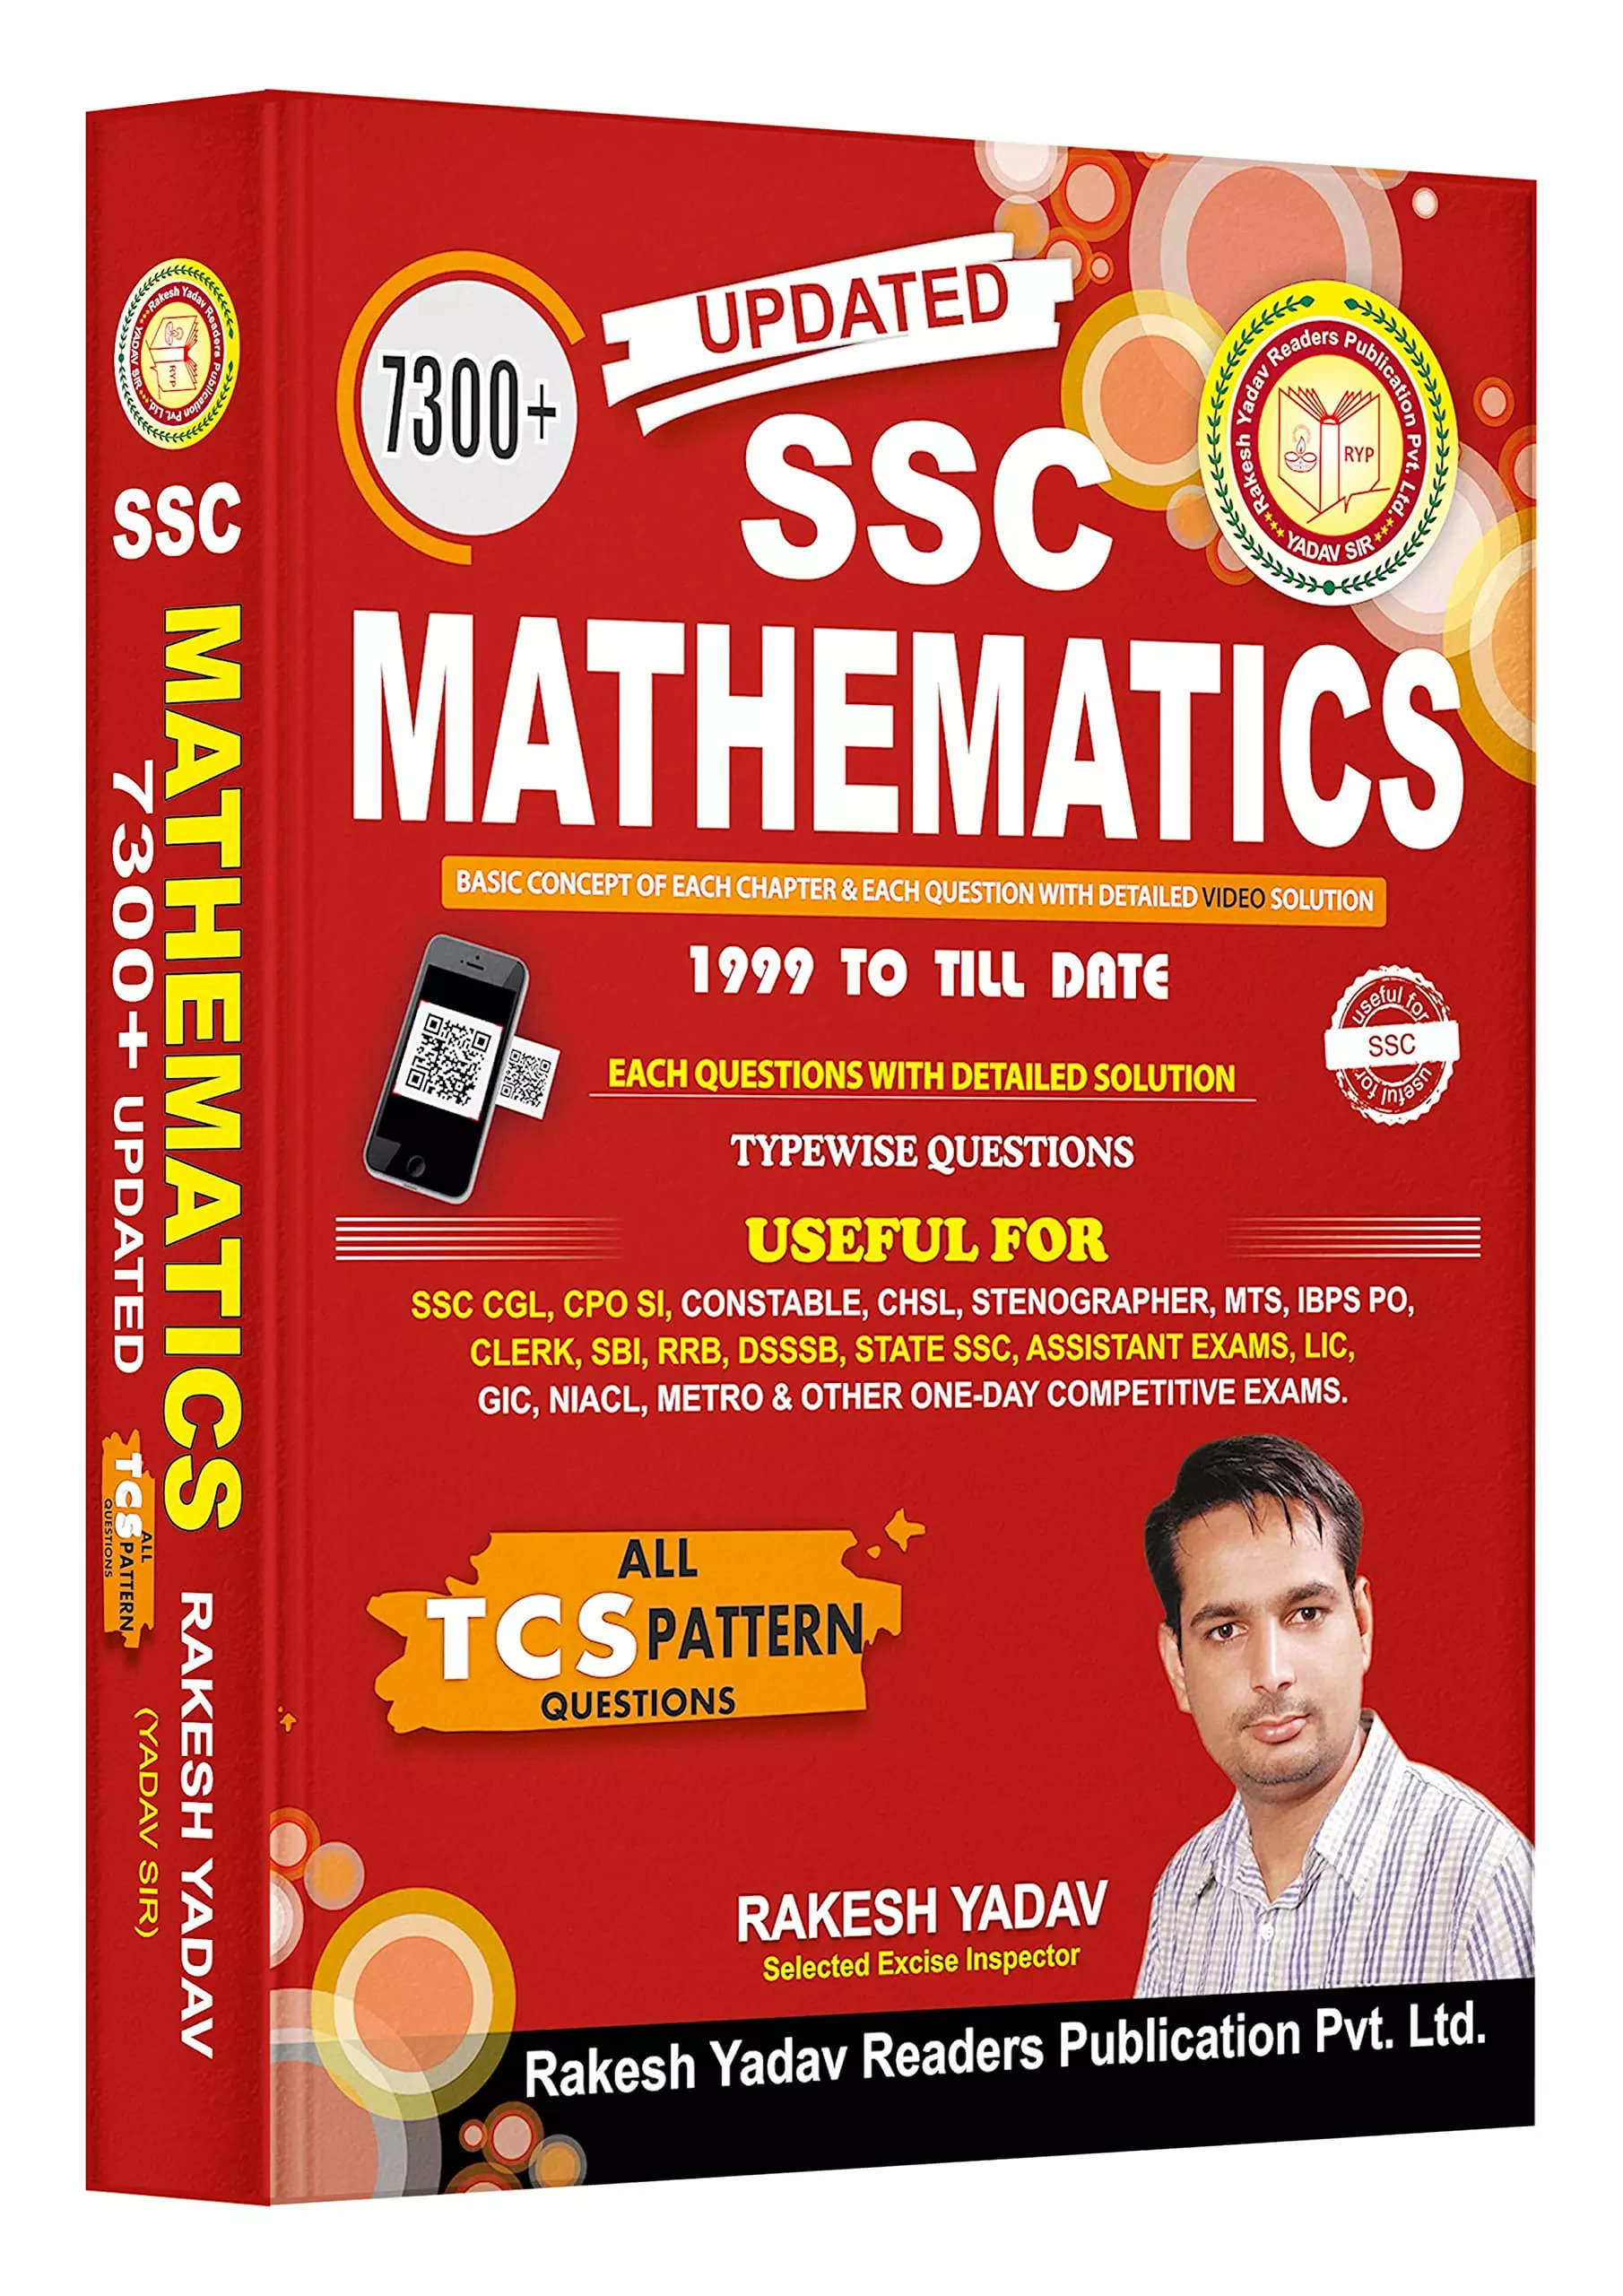 Best SSC CGL book 7 Best SSC CGL Books by Experts for Exam